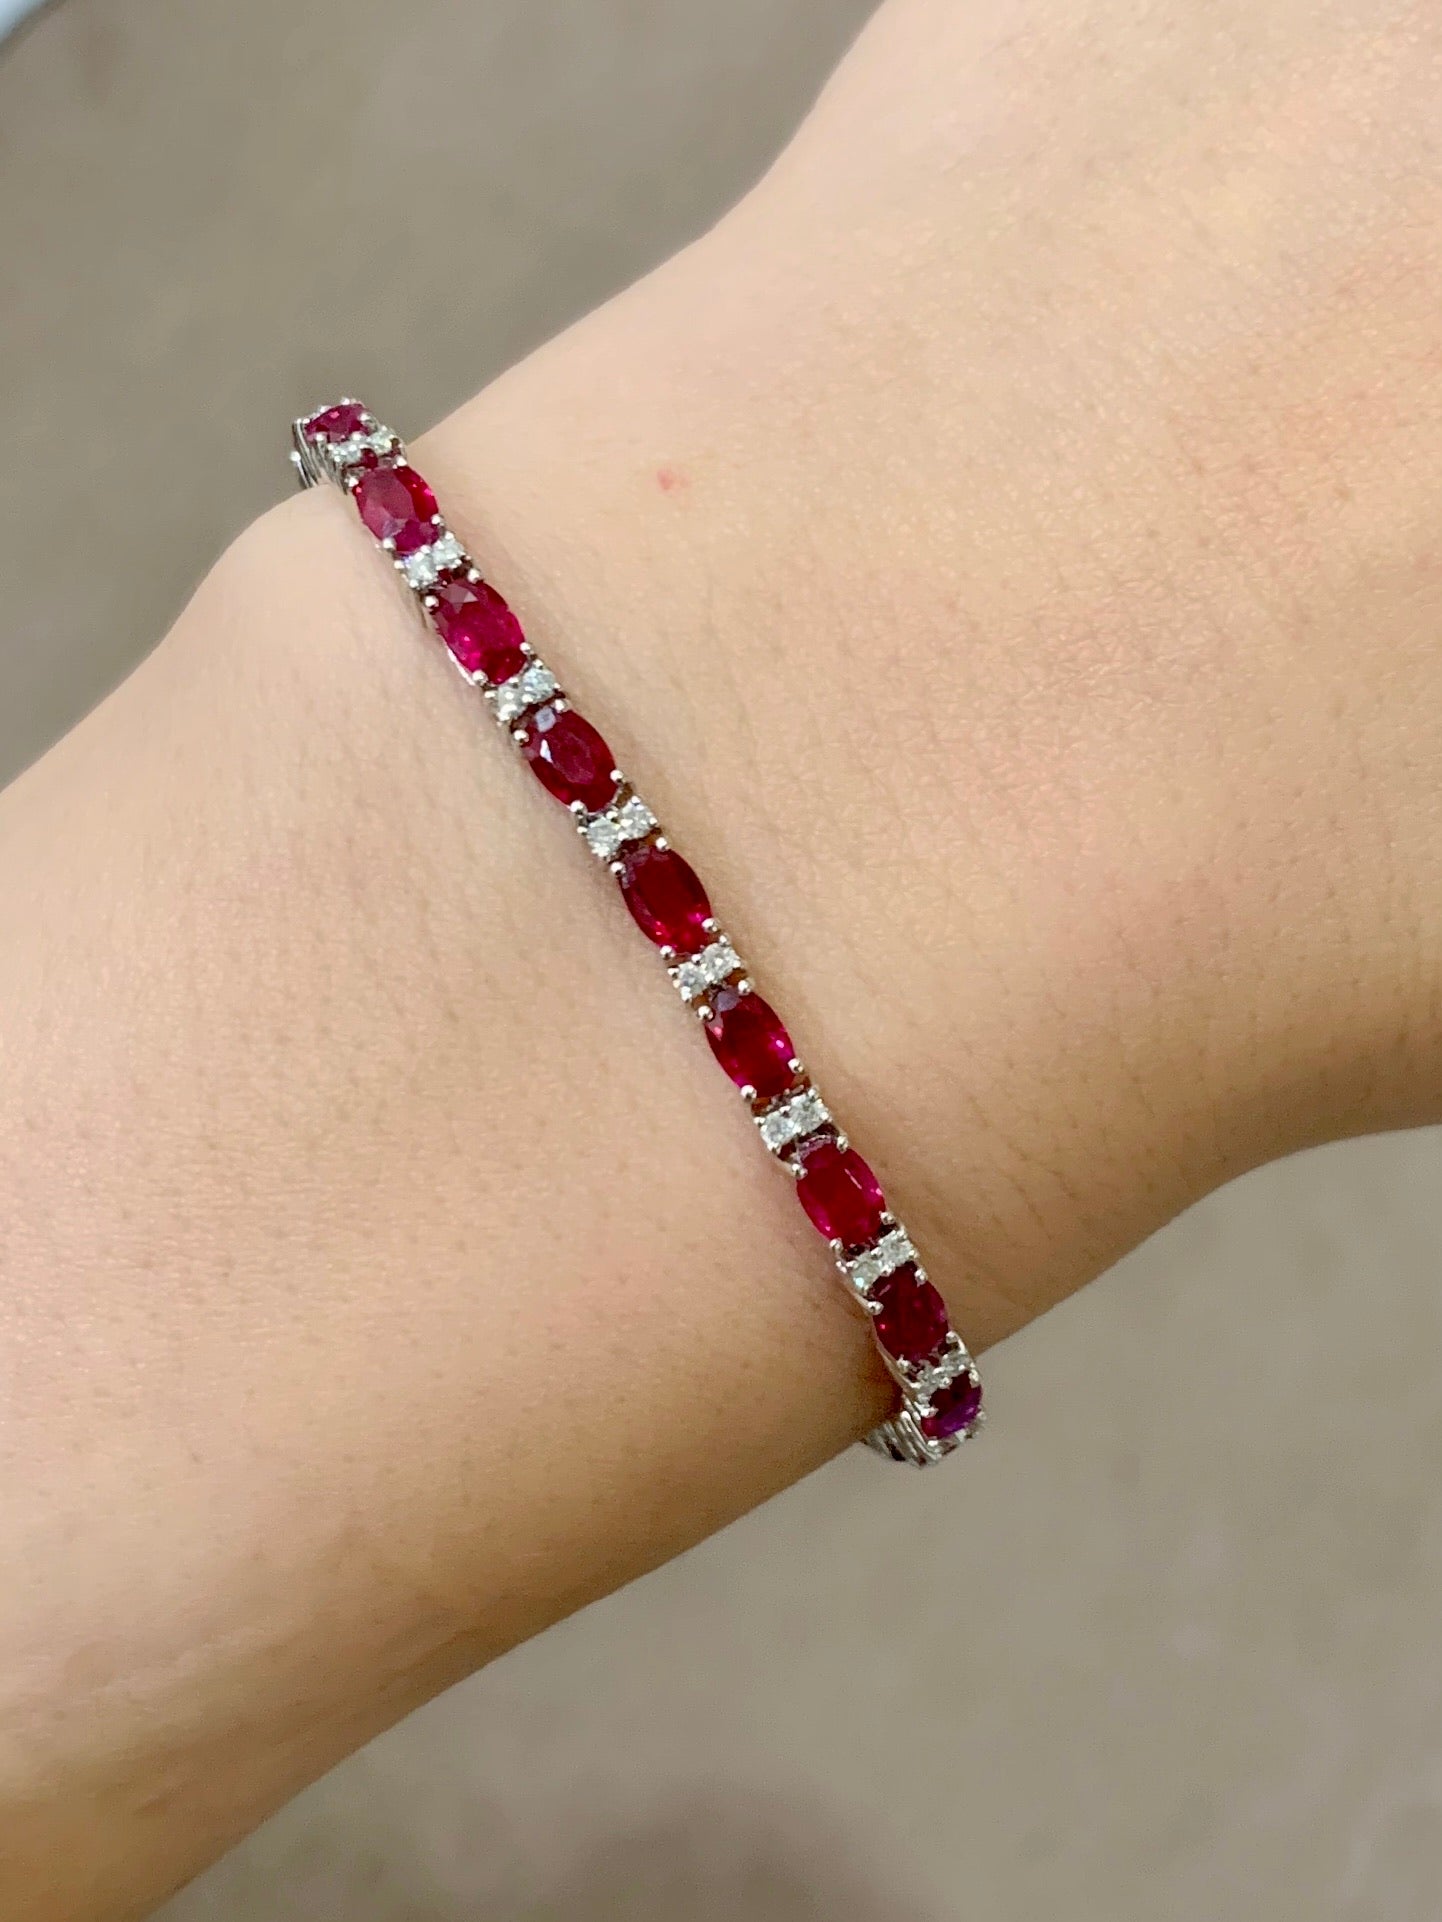 Buy Natural Ruby Bracelet / Red Ruby / Natural Ruby Jewelry / White Gold  Plated S925 Sterling Silver Ruby Bracelet / Jewelry for Women Online in  India - Etsy